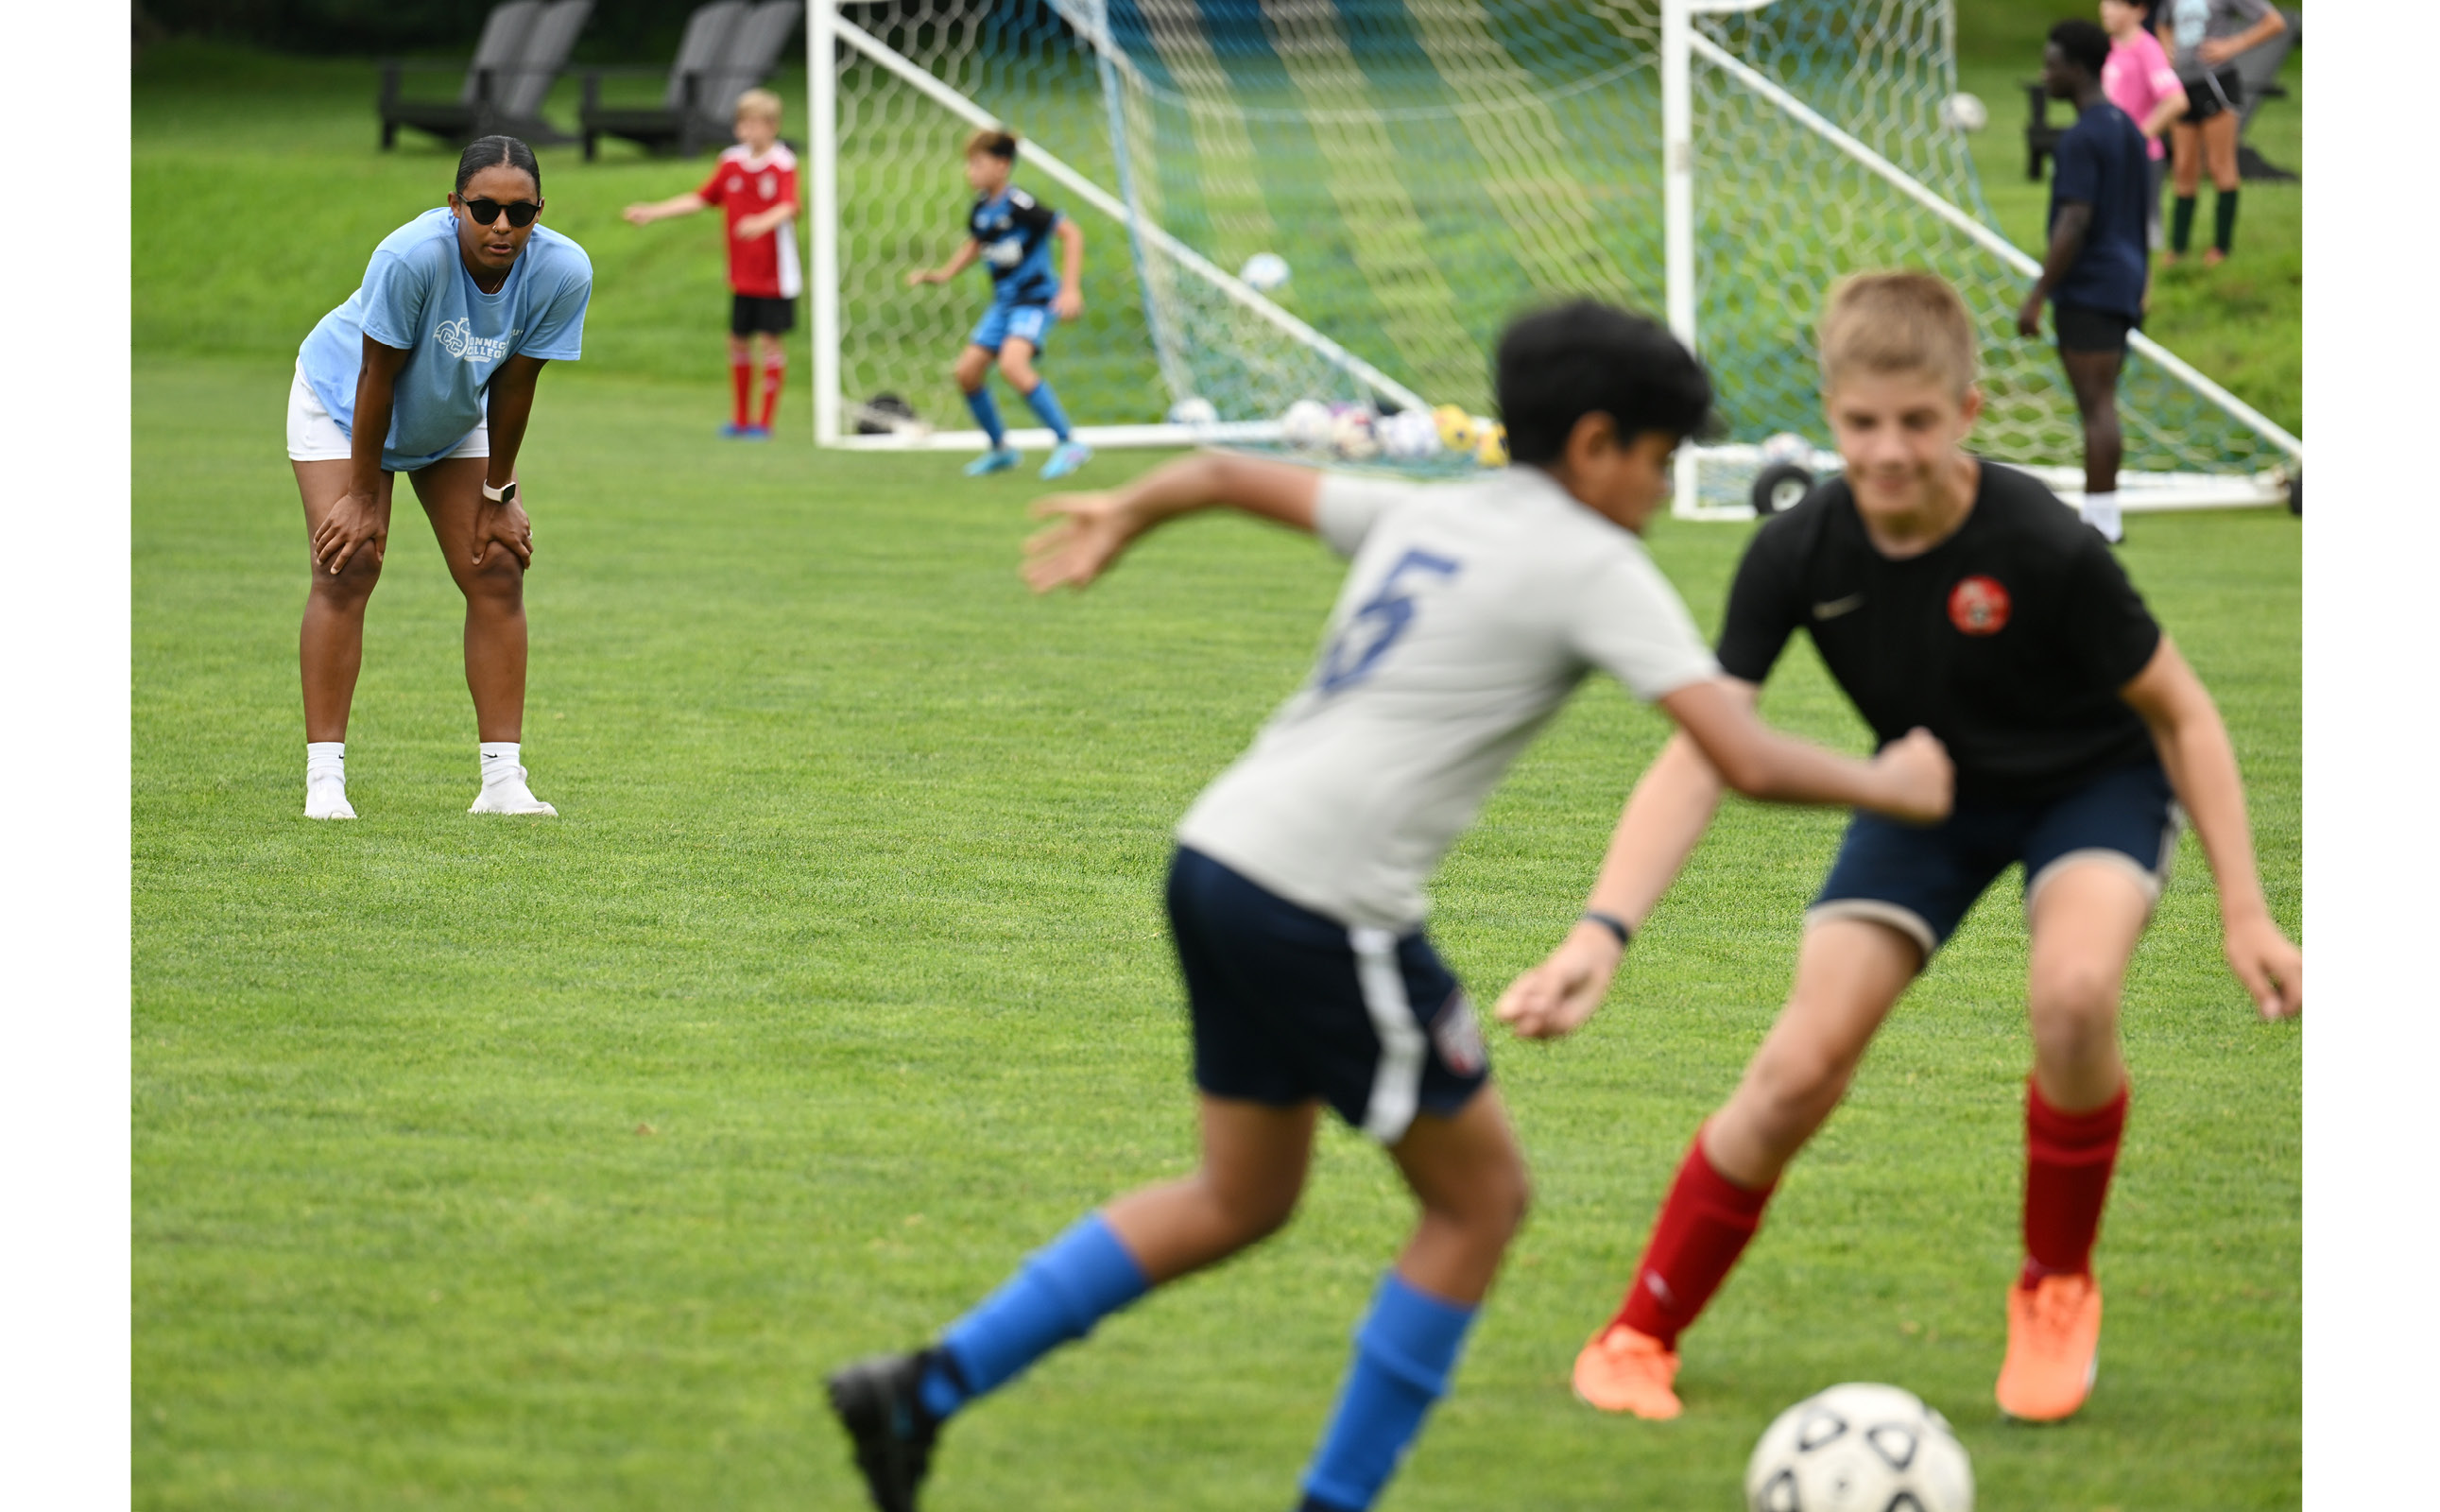 Connecticut College assistant women’s soccer coach Mia Santana leads soccer camp on Harkness Green. Conn's annual summer sports camps are popular in the region.